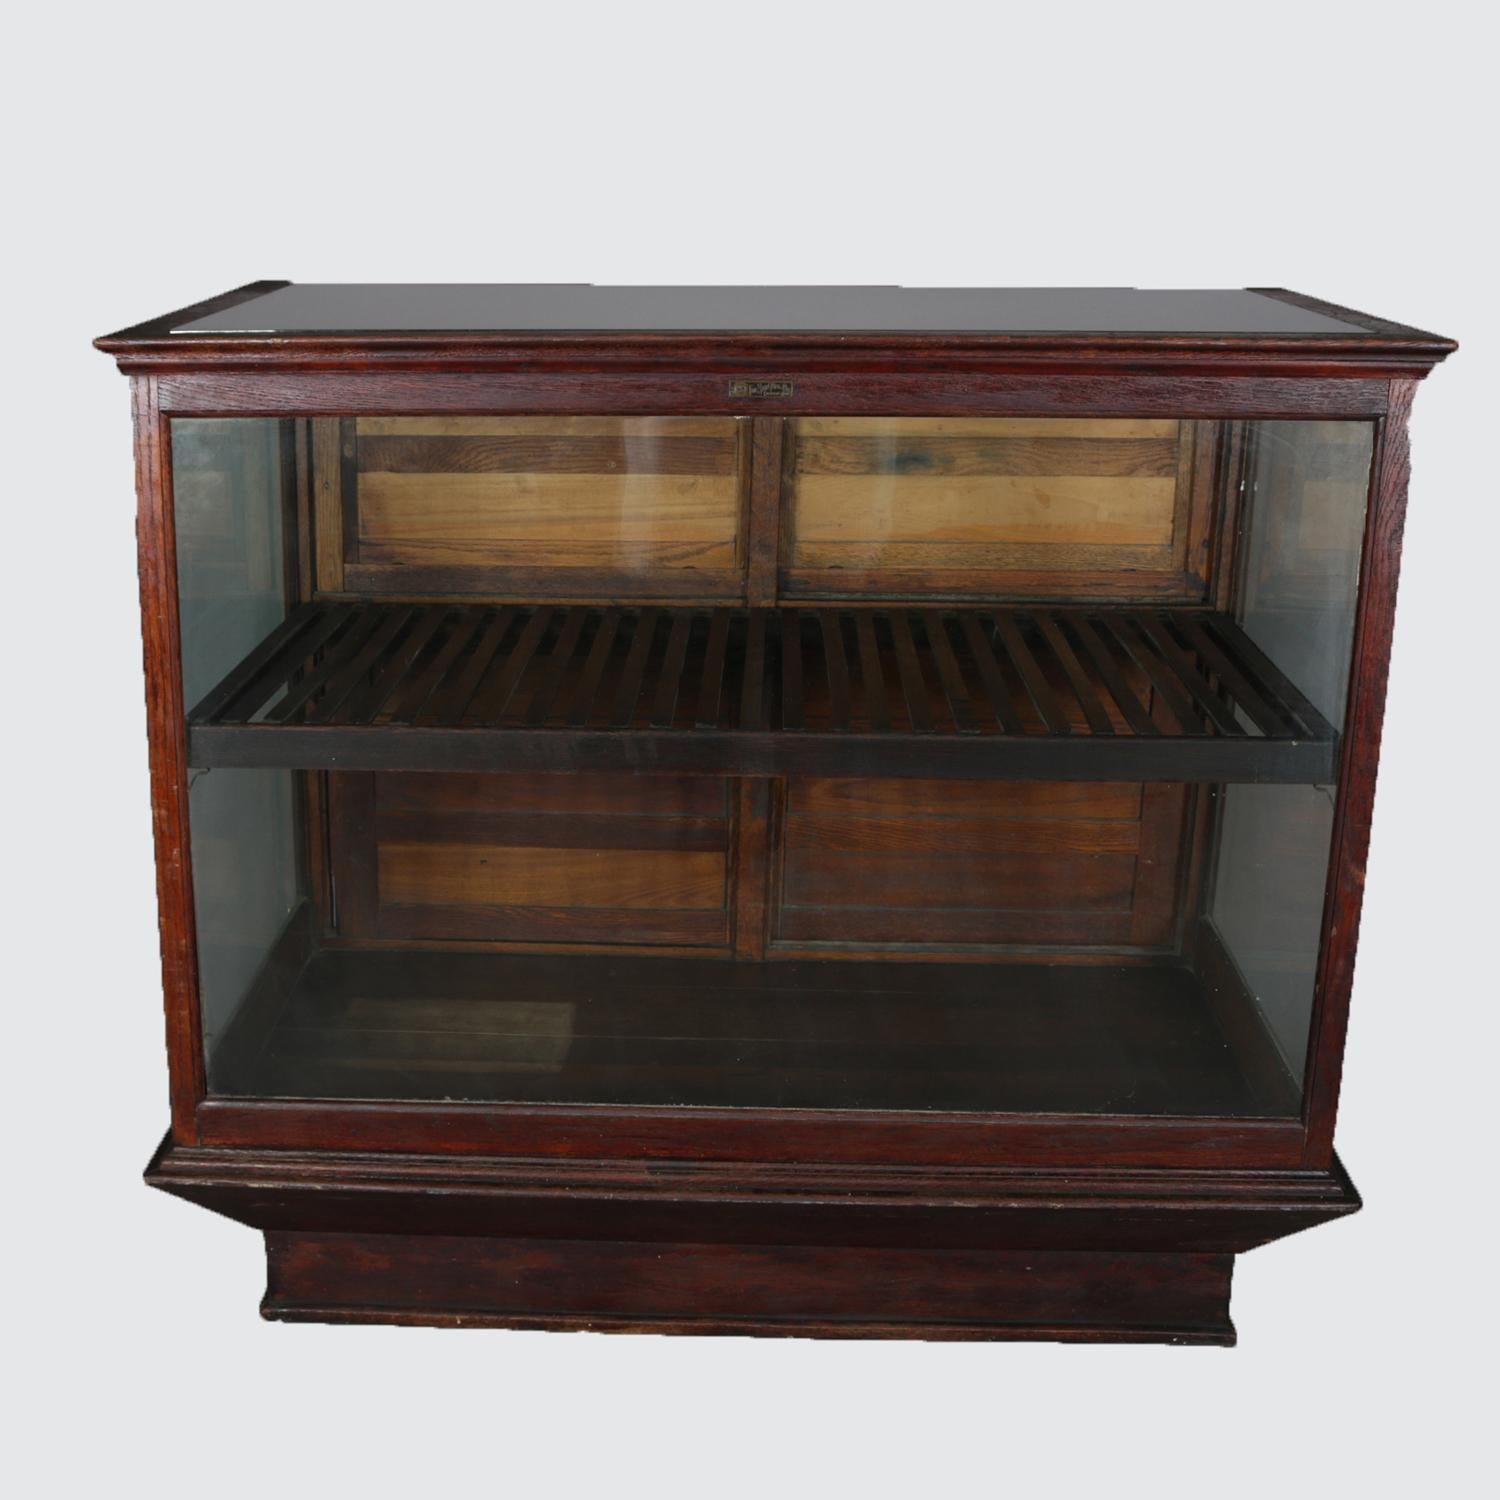 20th Century Antique Oak and Glass Country Store Display Cabinet by Sun Mfg. Co., circa 1900